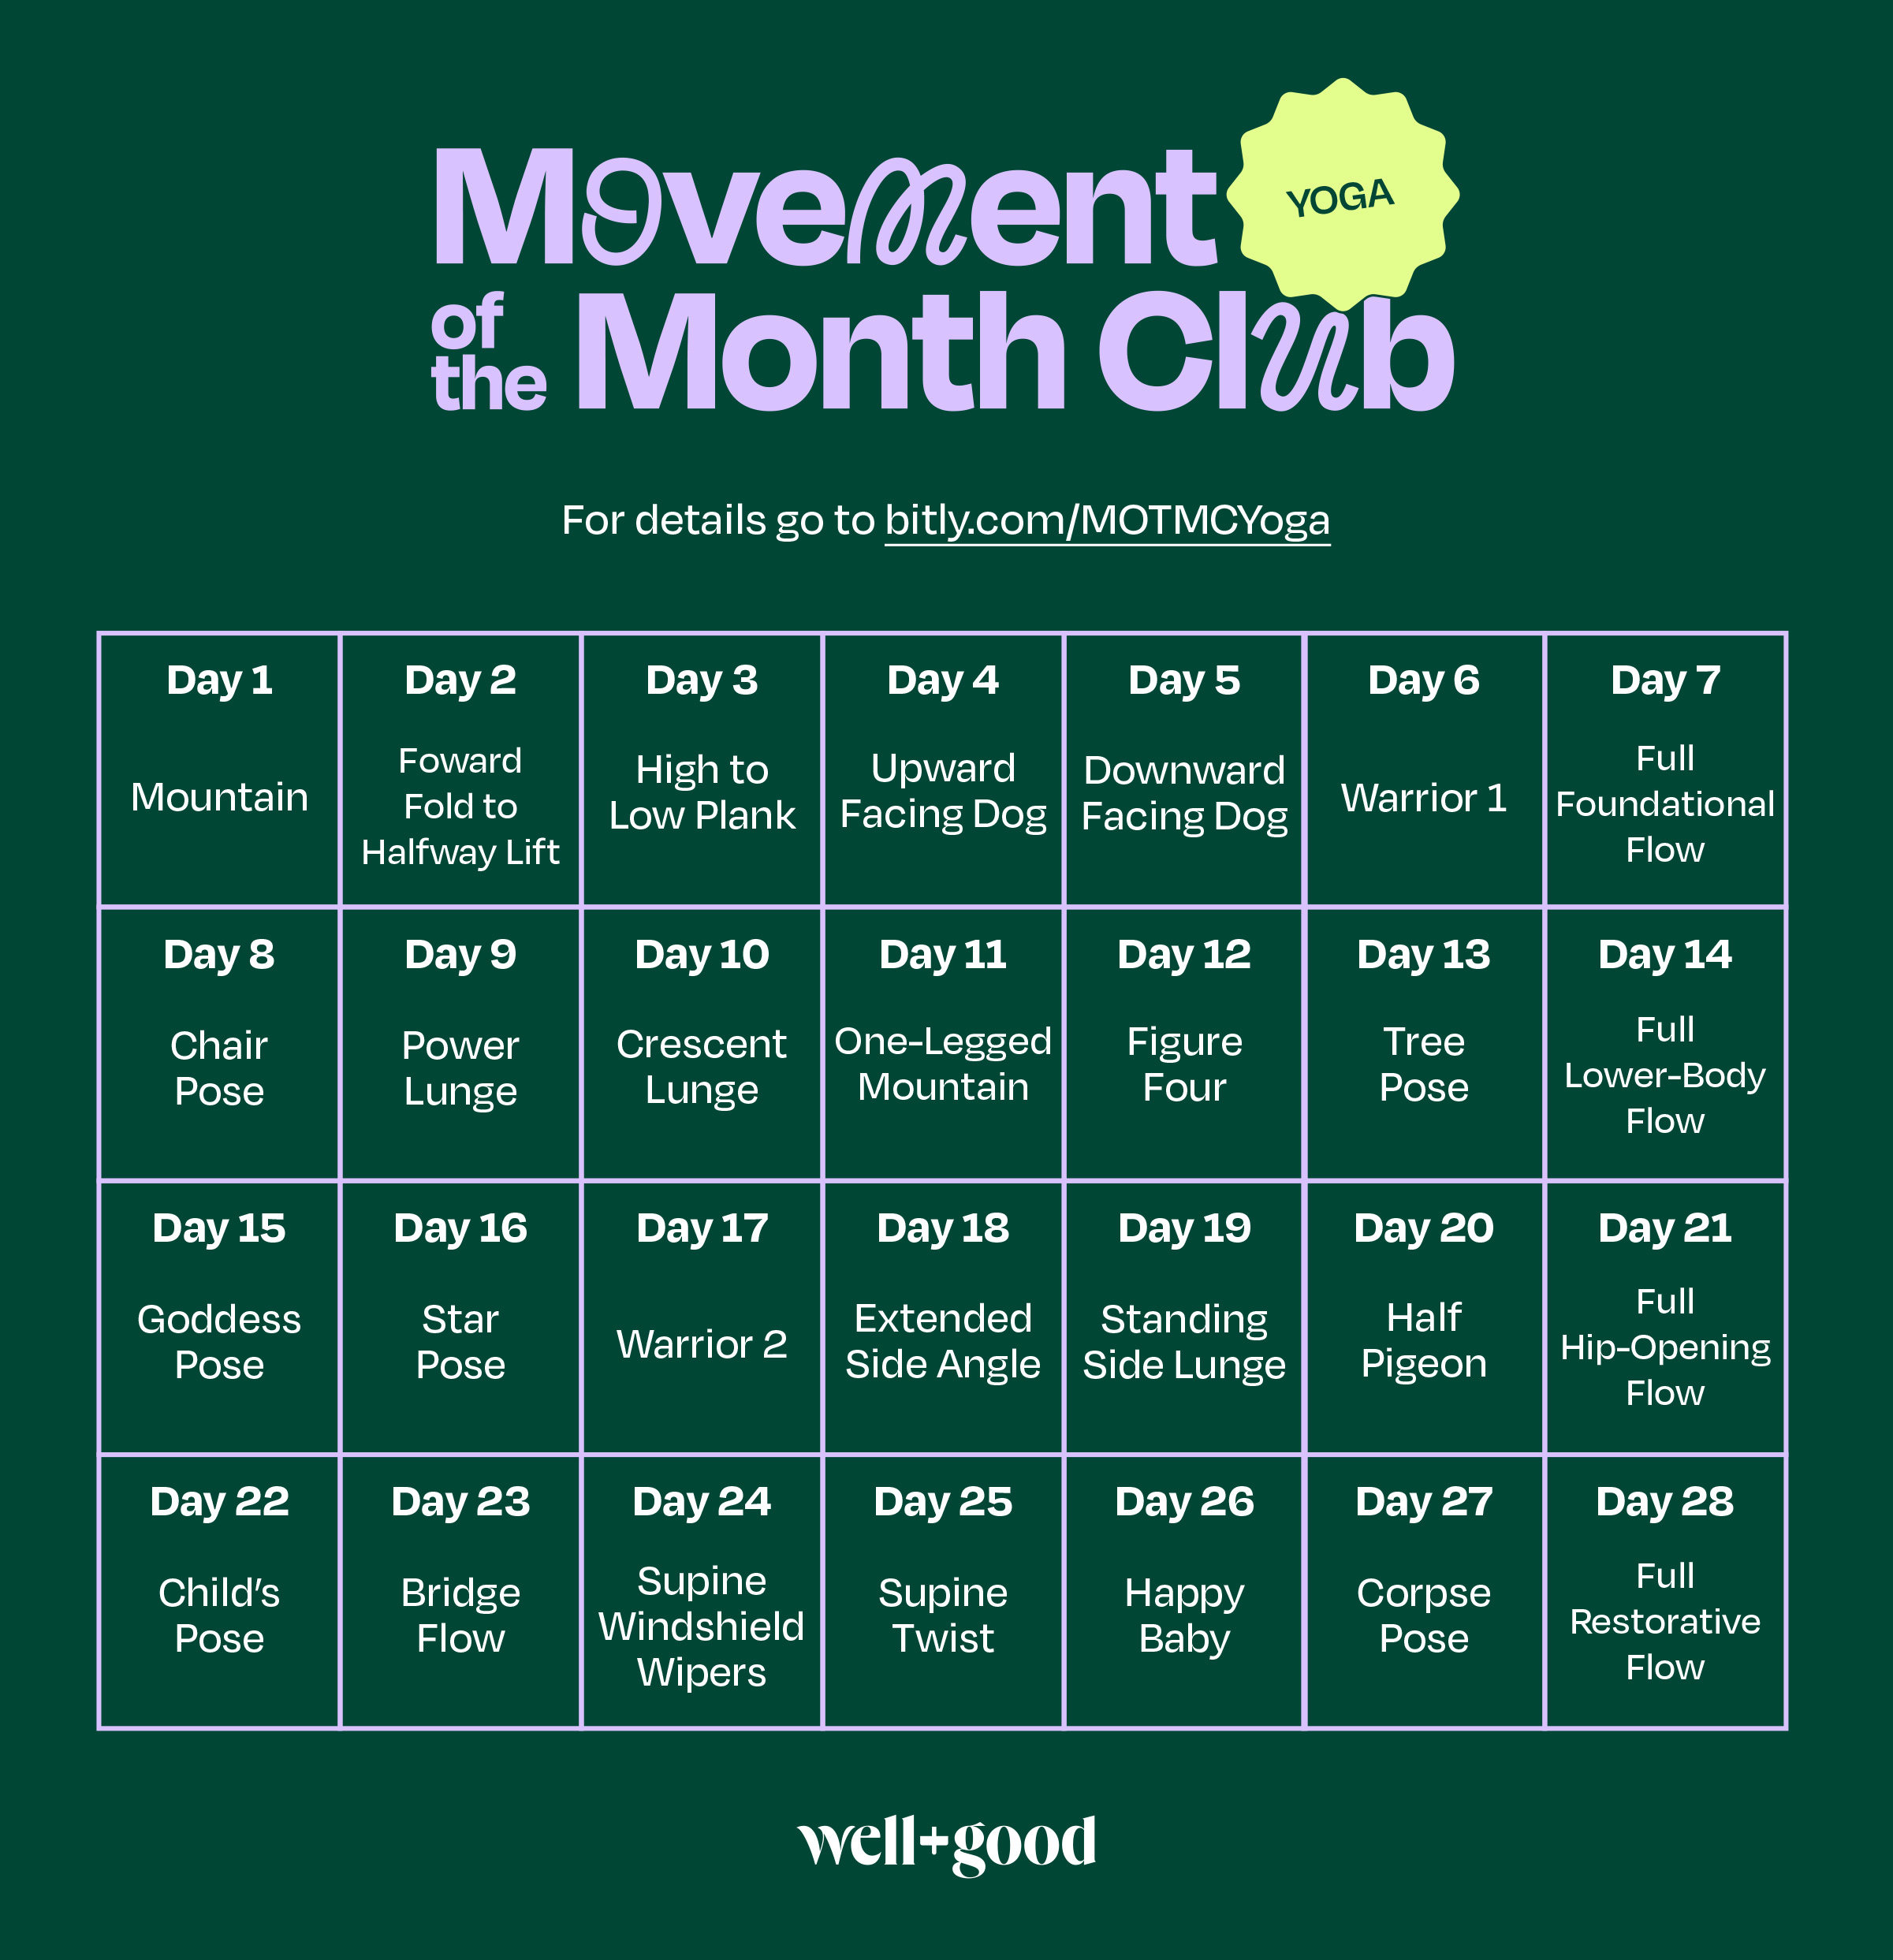 calendar of the Movement of the Month Club 4-week yoga challenge, showing a specific yoga move on most days followed by a full flow on the last day each week